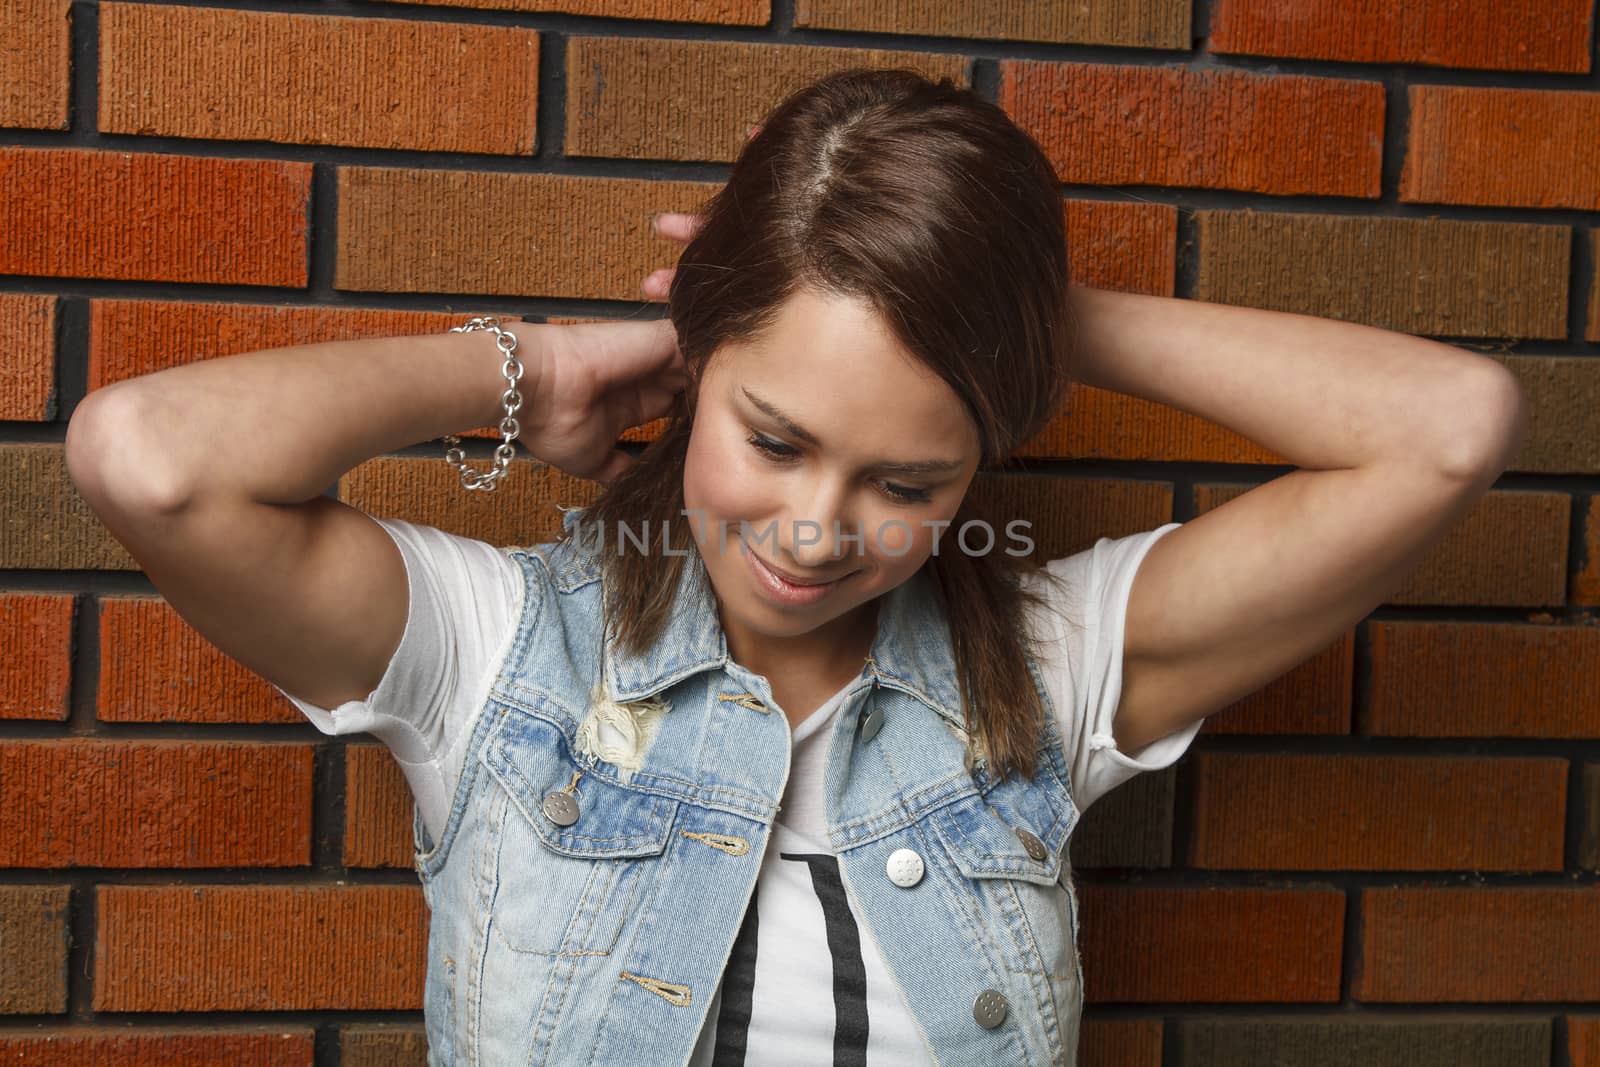 young woman against brick wall, tying her hair up